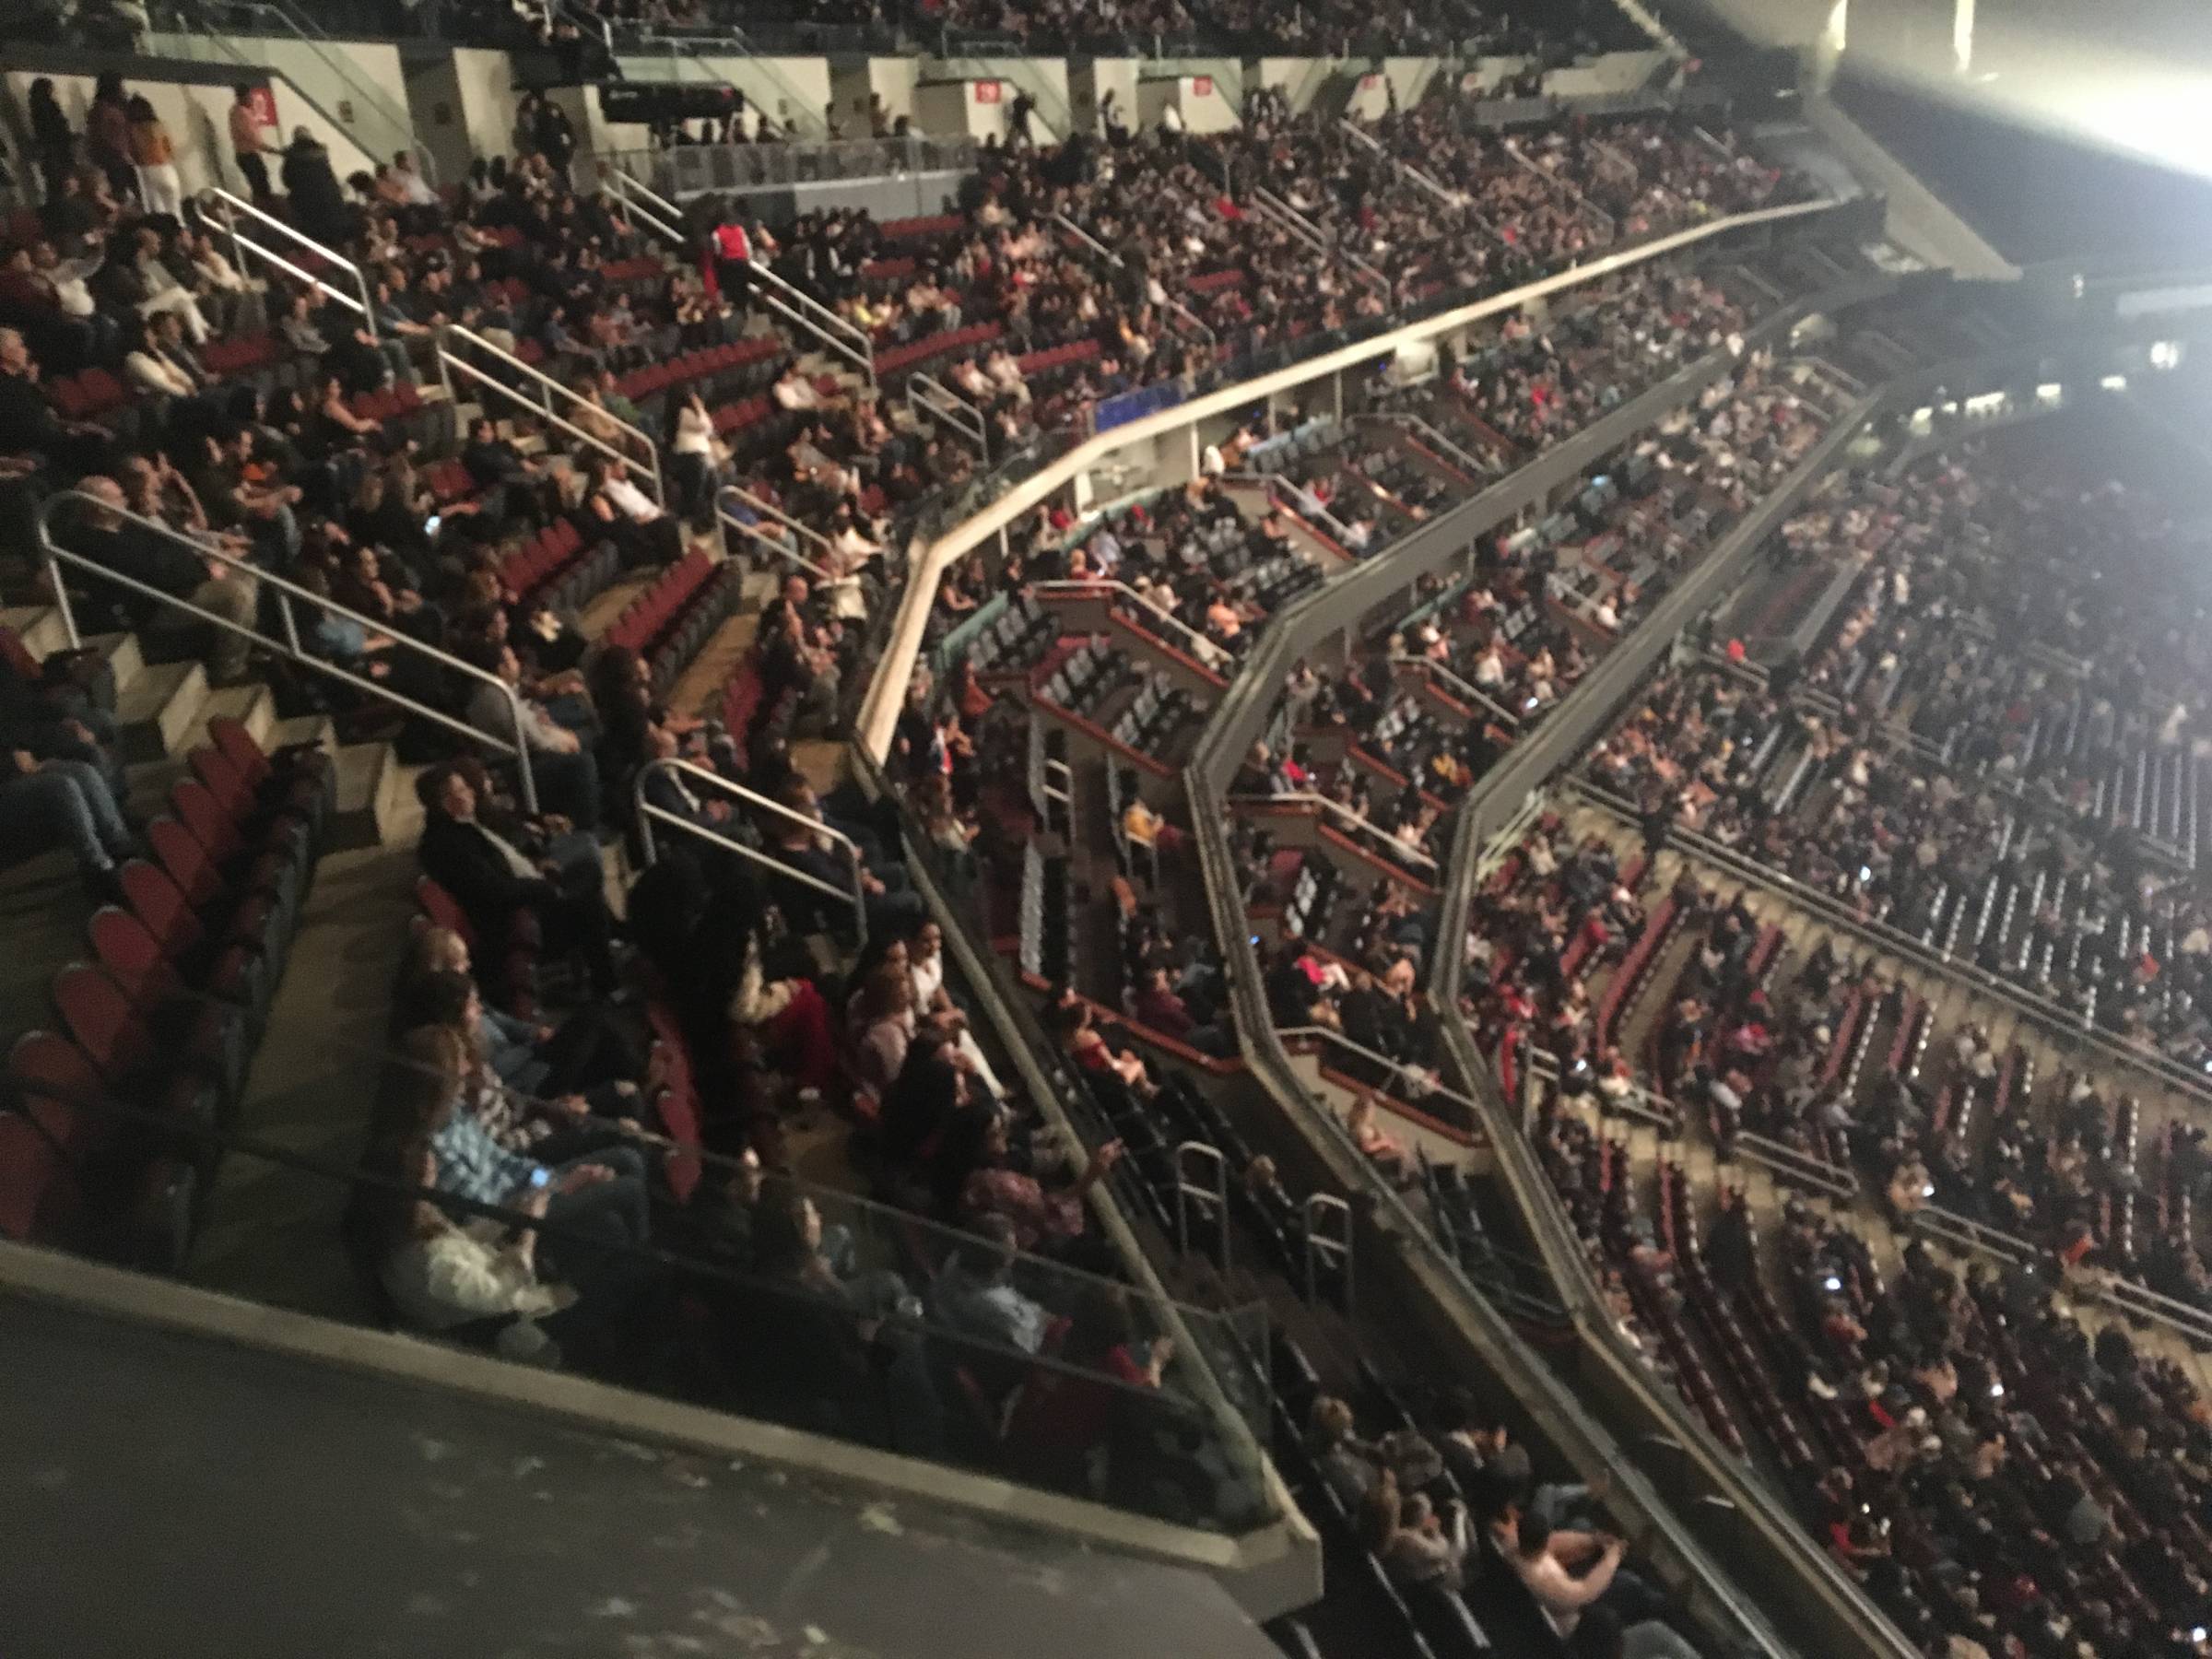 Section 1 at Prudential Center 